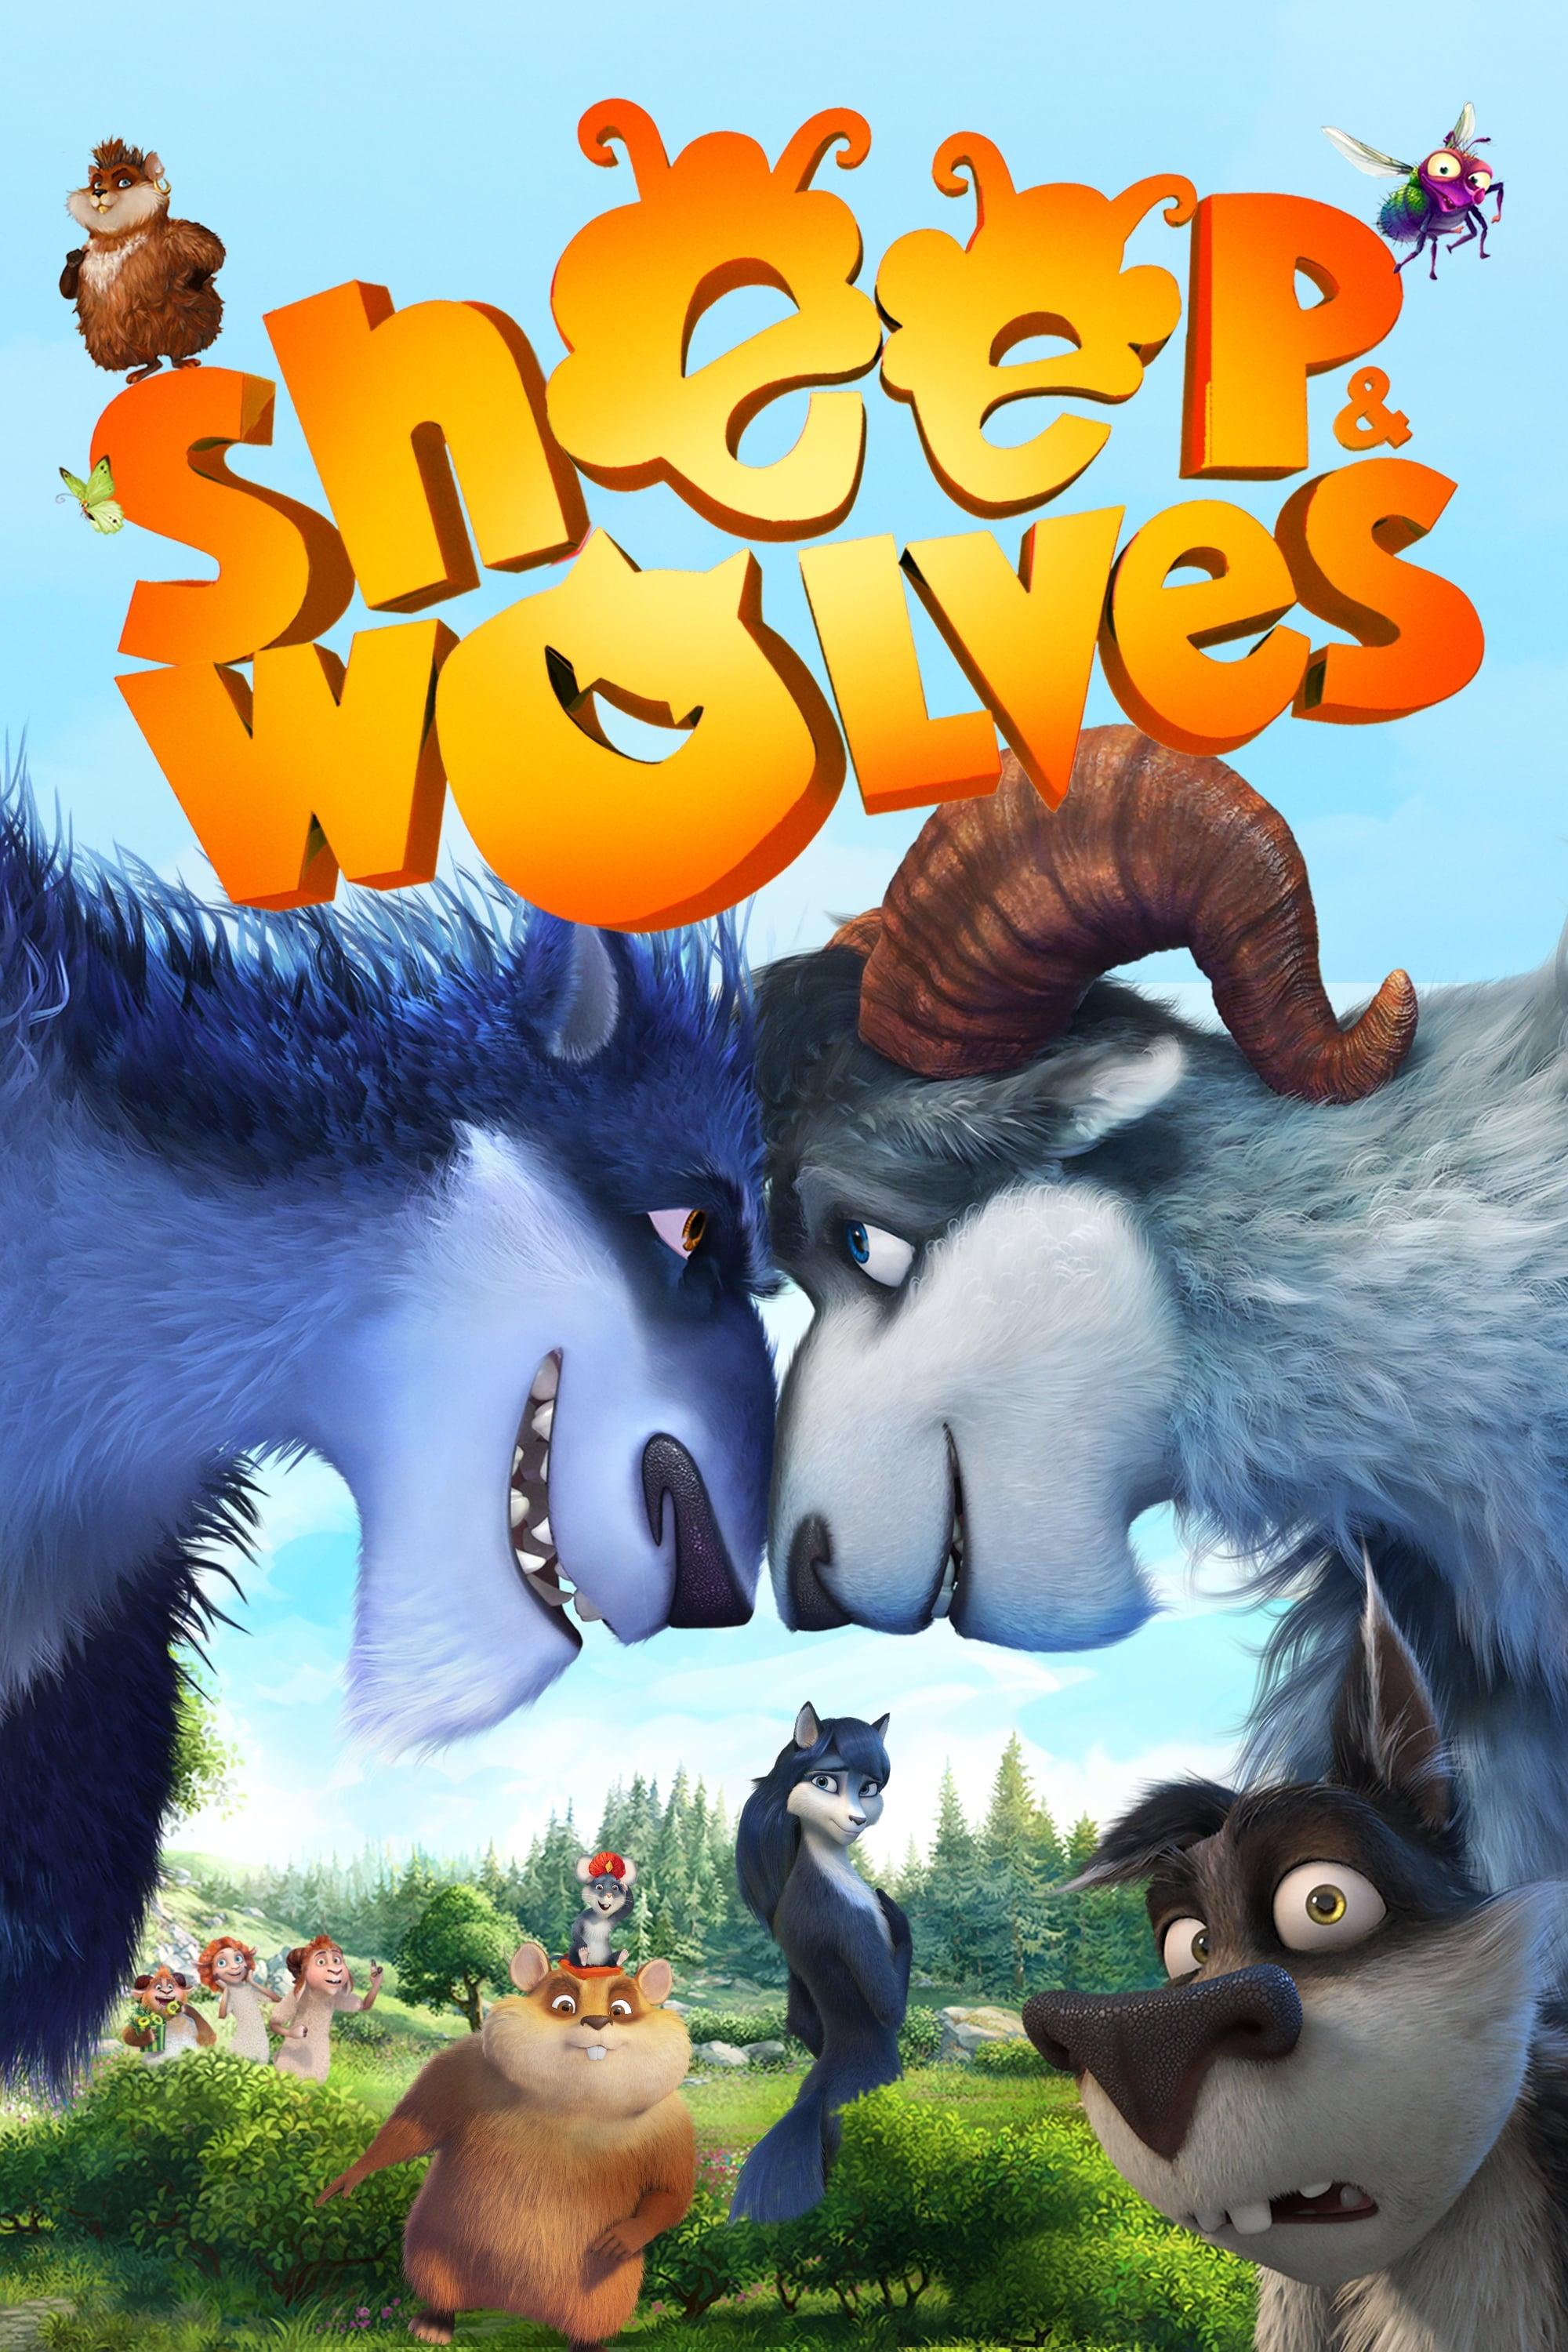 Sheep & Wolves poster